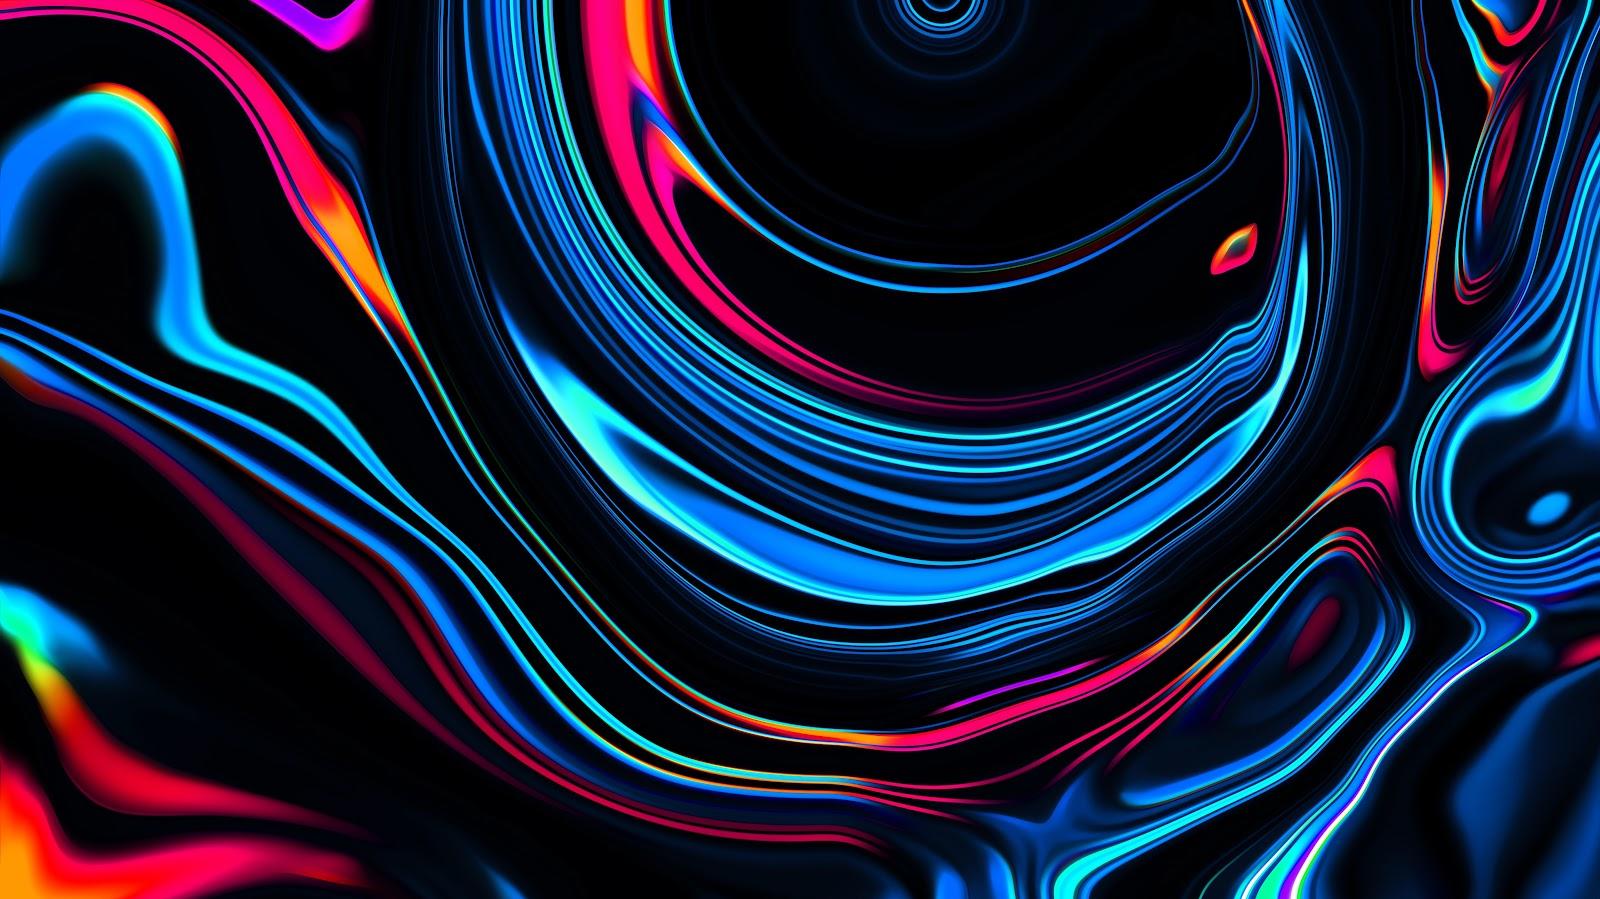 Pc Wallpaper 4k Cool Abstract Design